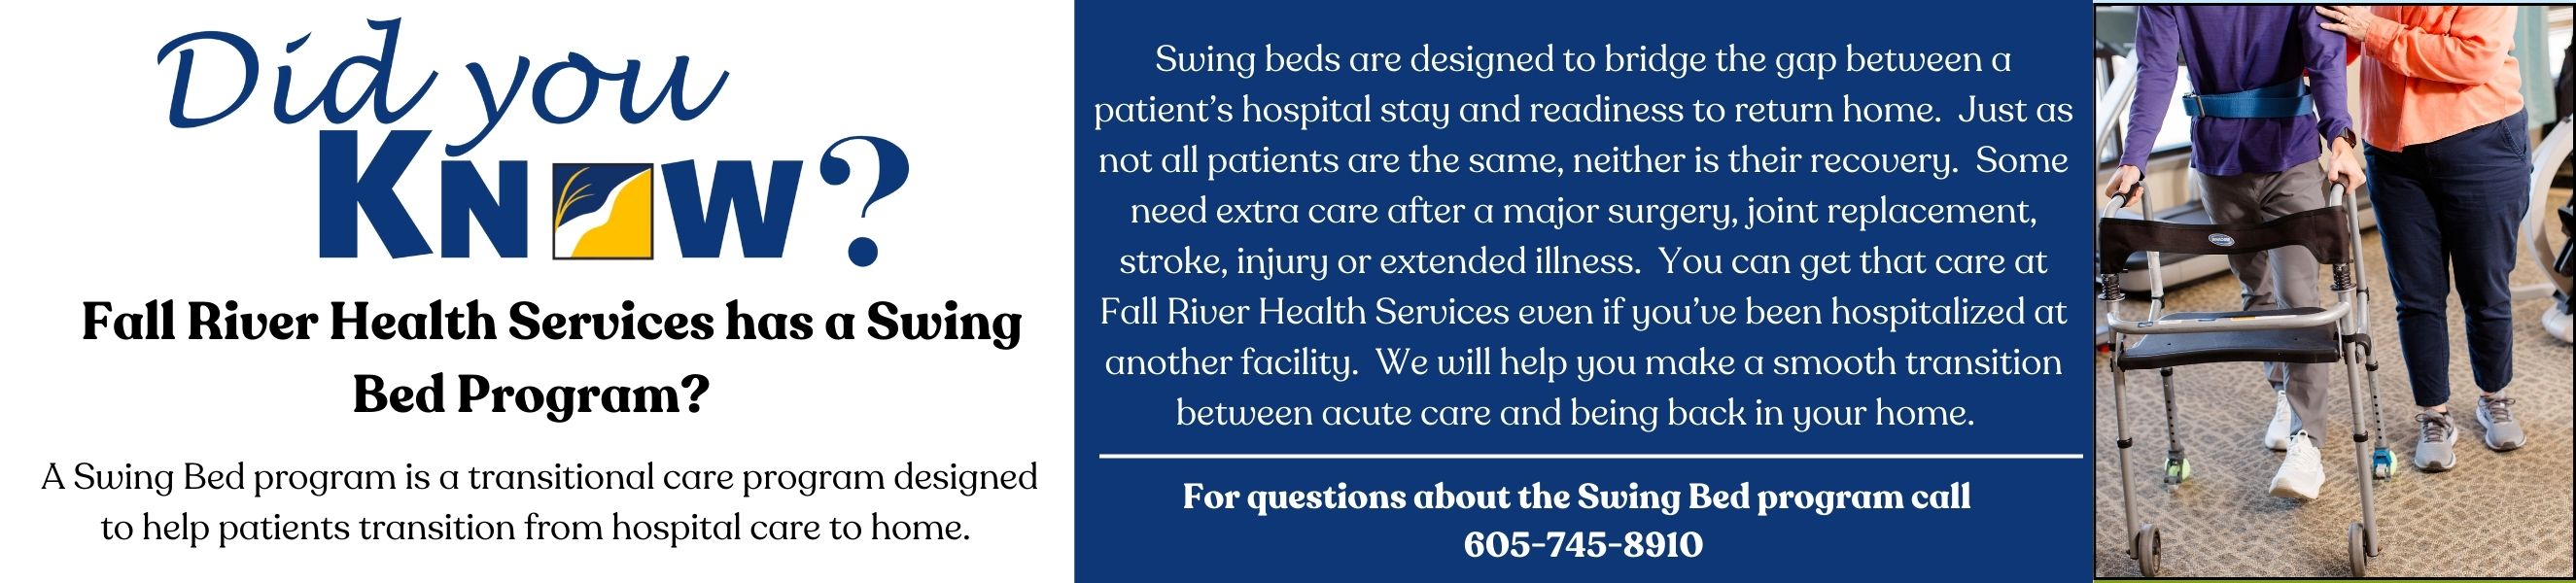 Did you know? Fall River Health Services has a swing bed program? A swing bed program is a transitional care program designed to help patients transition from hospital care to home. 605-745-8910